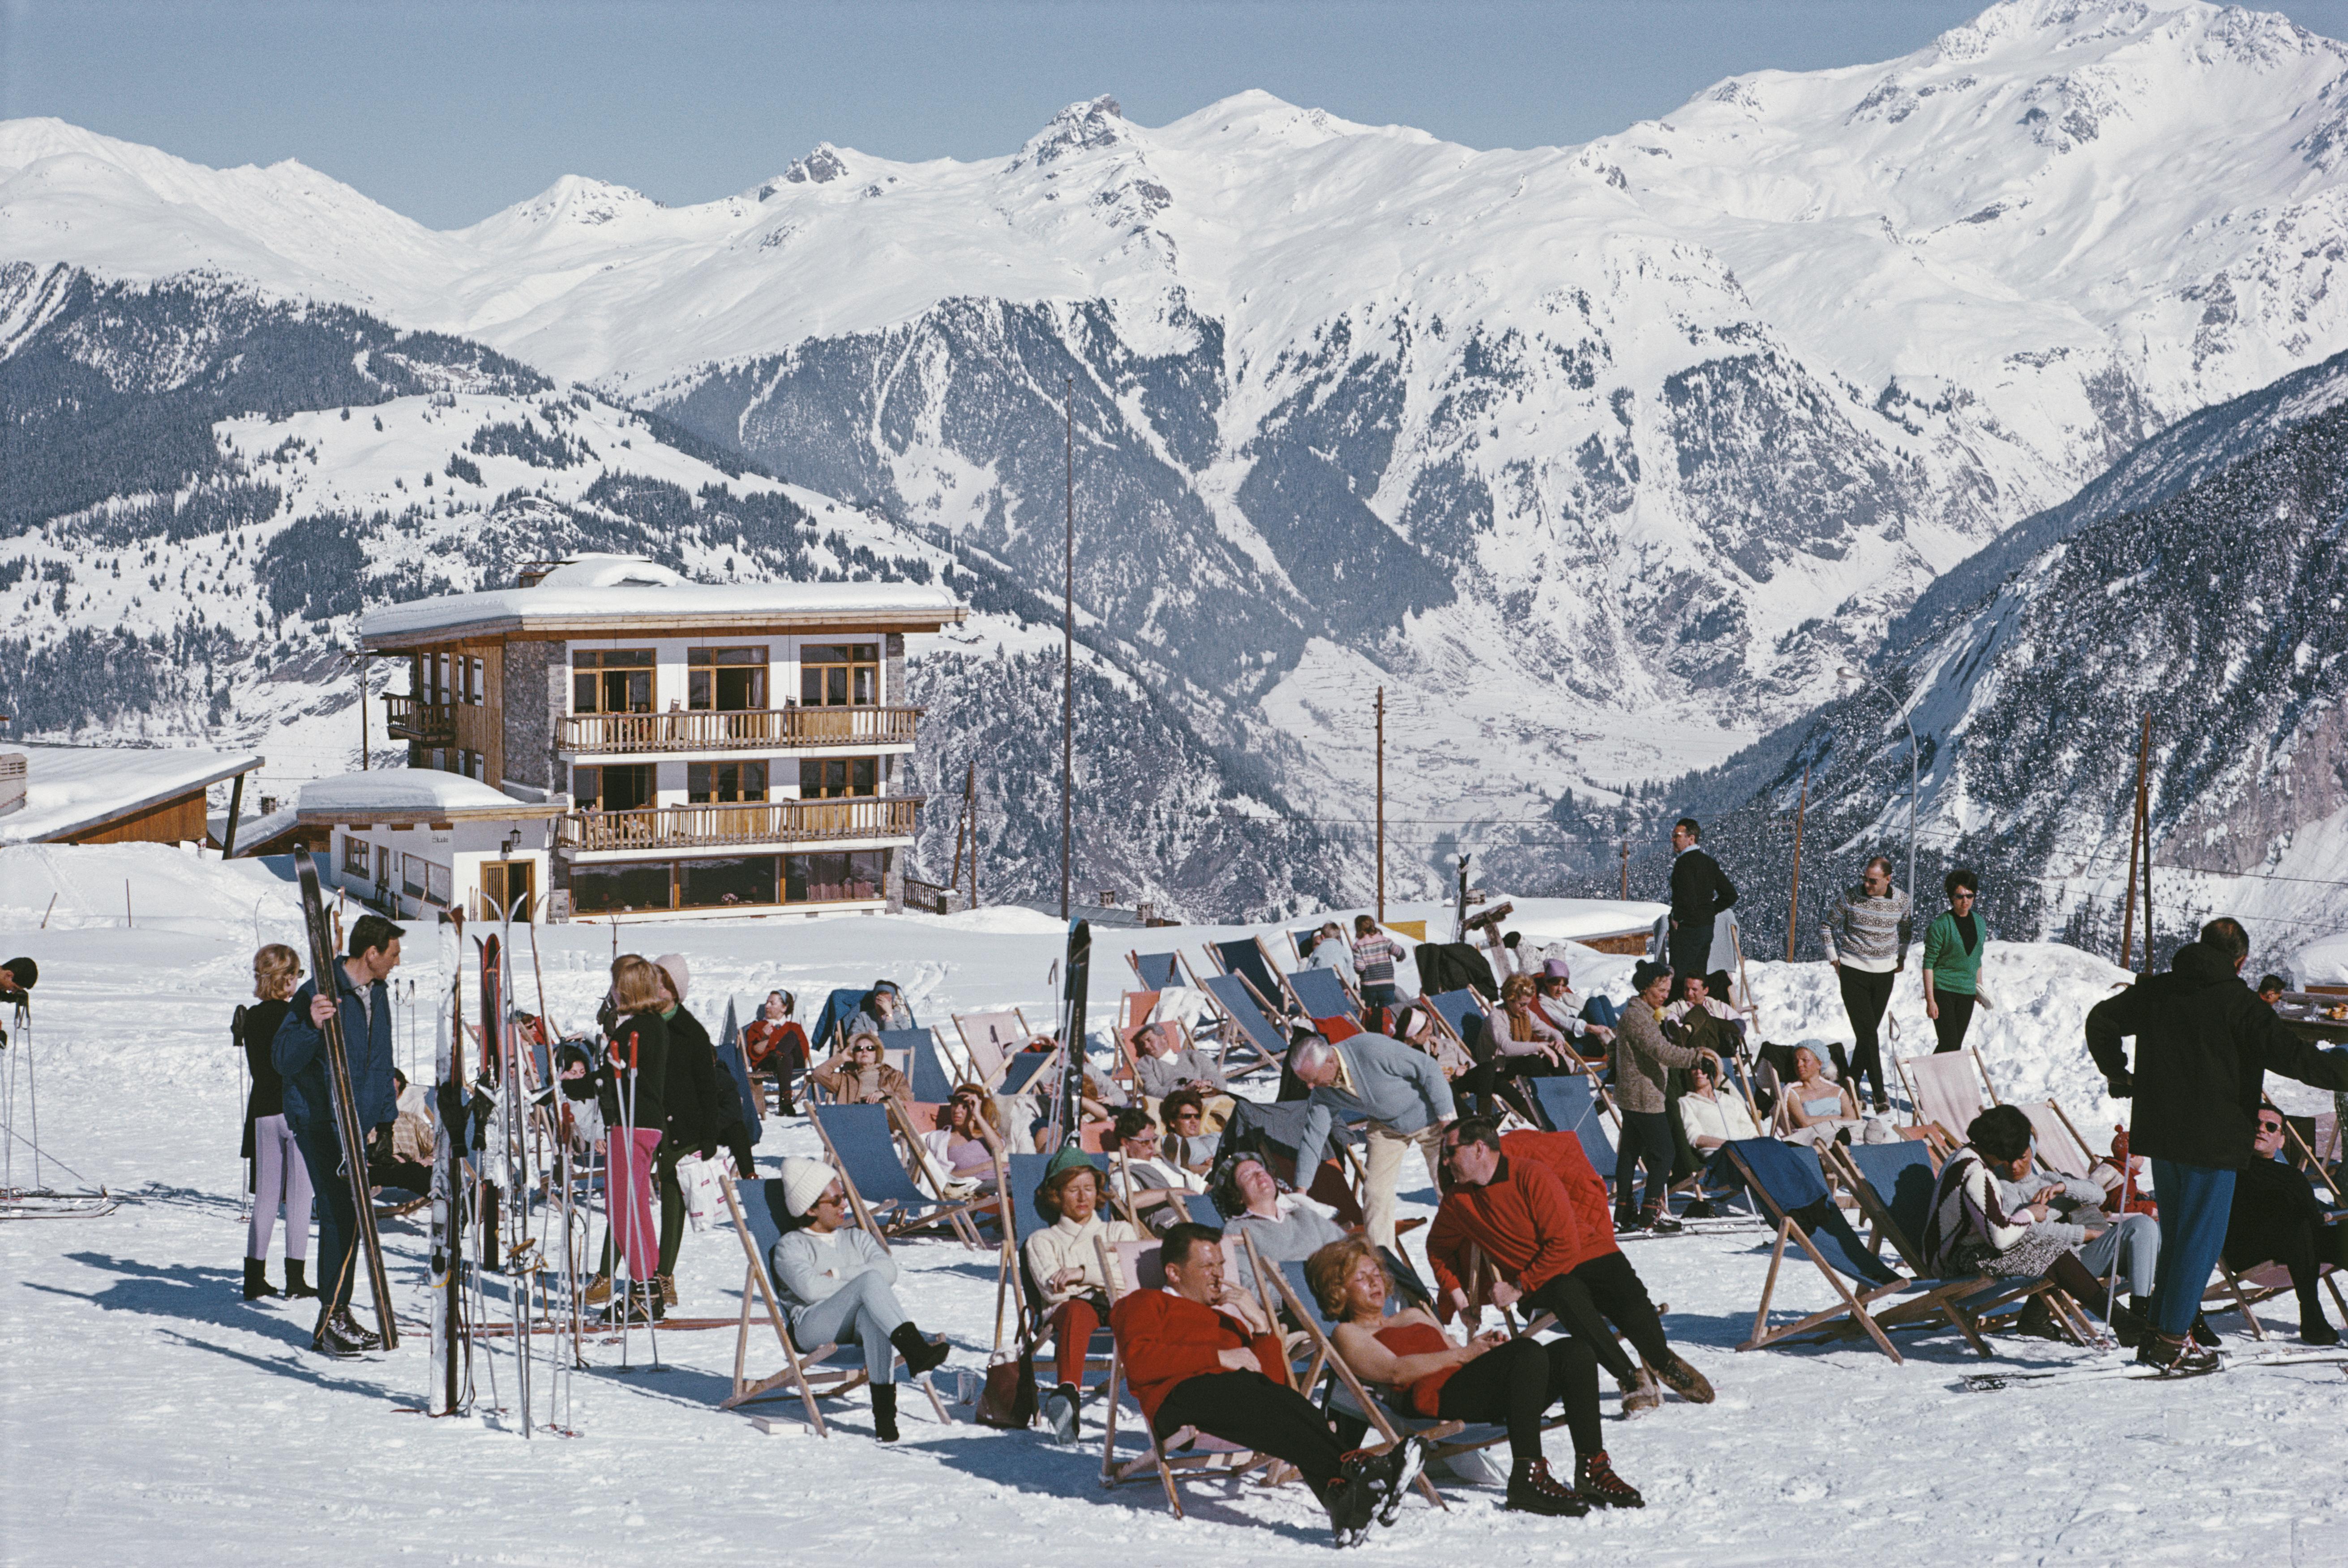 Aarons mince, courchevel